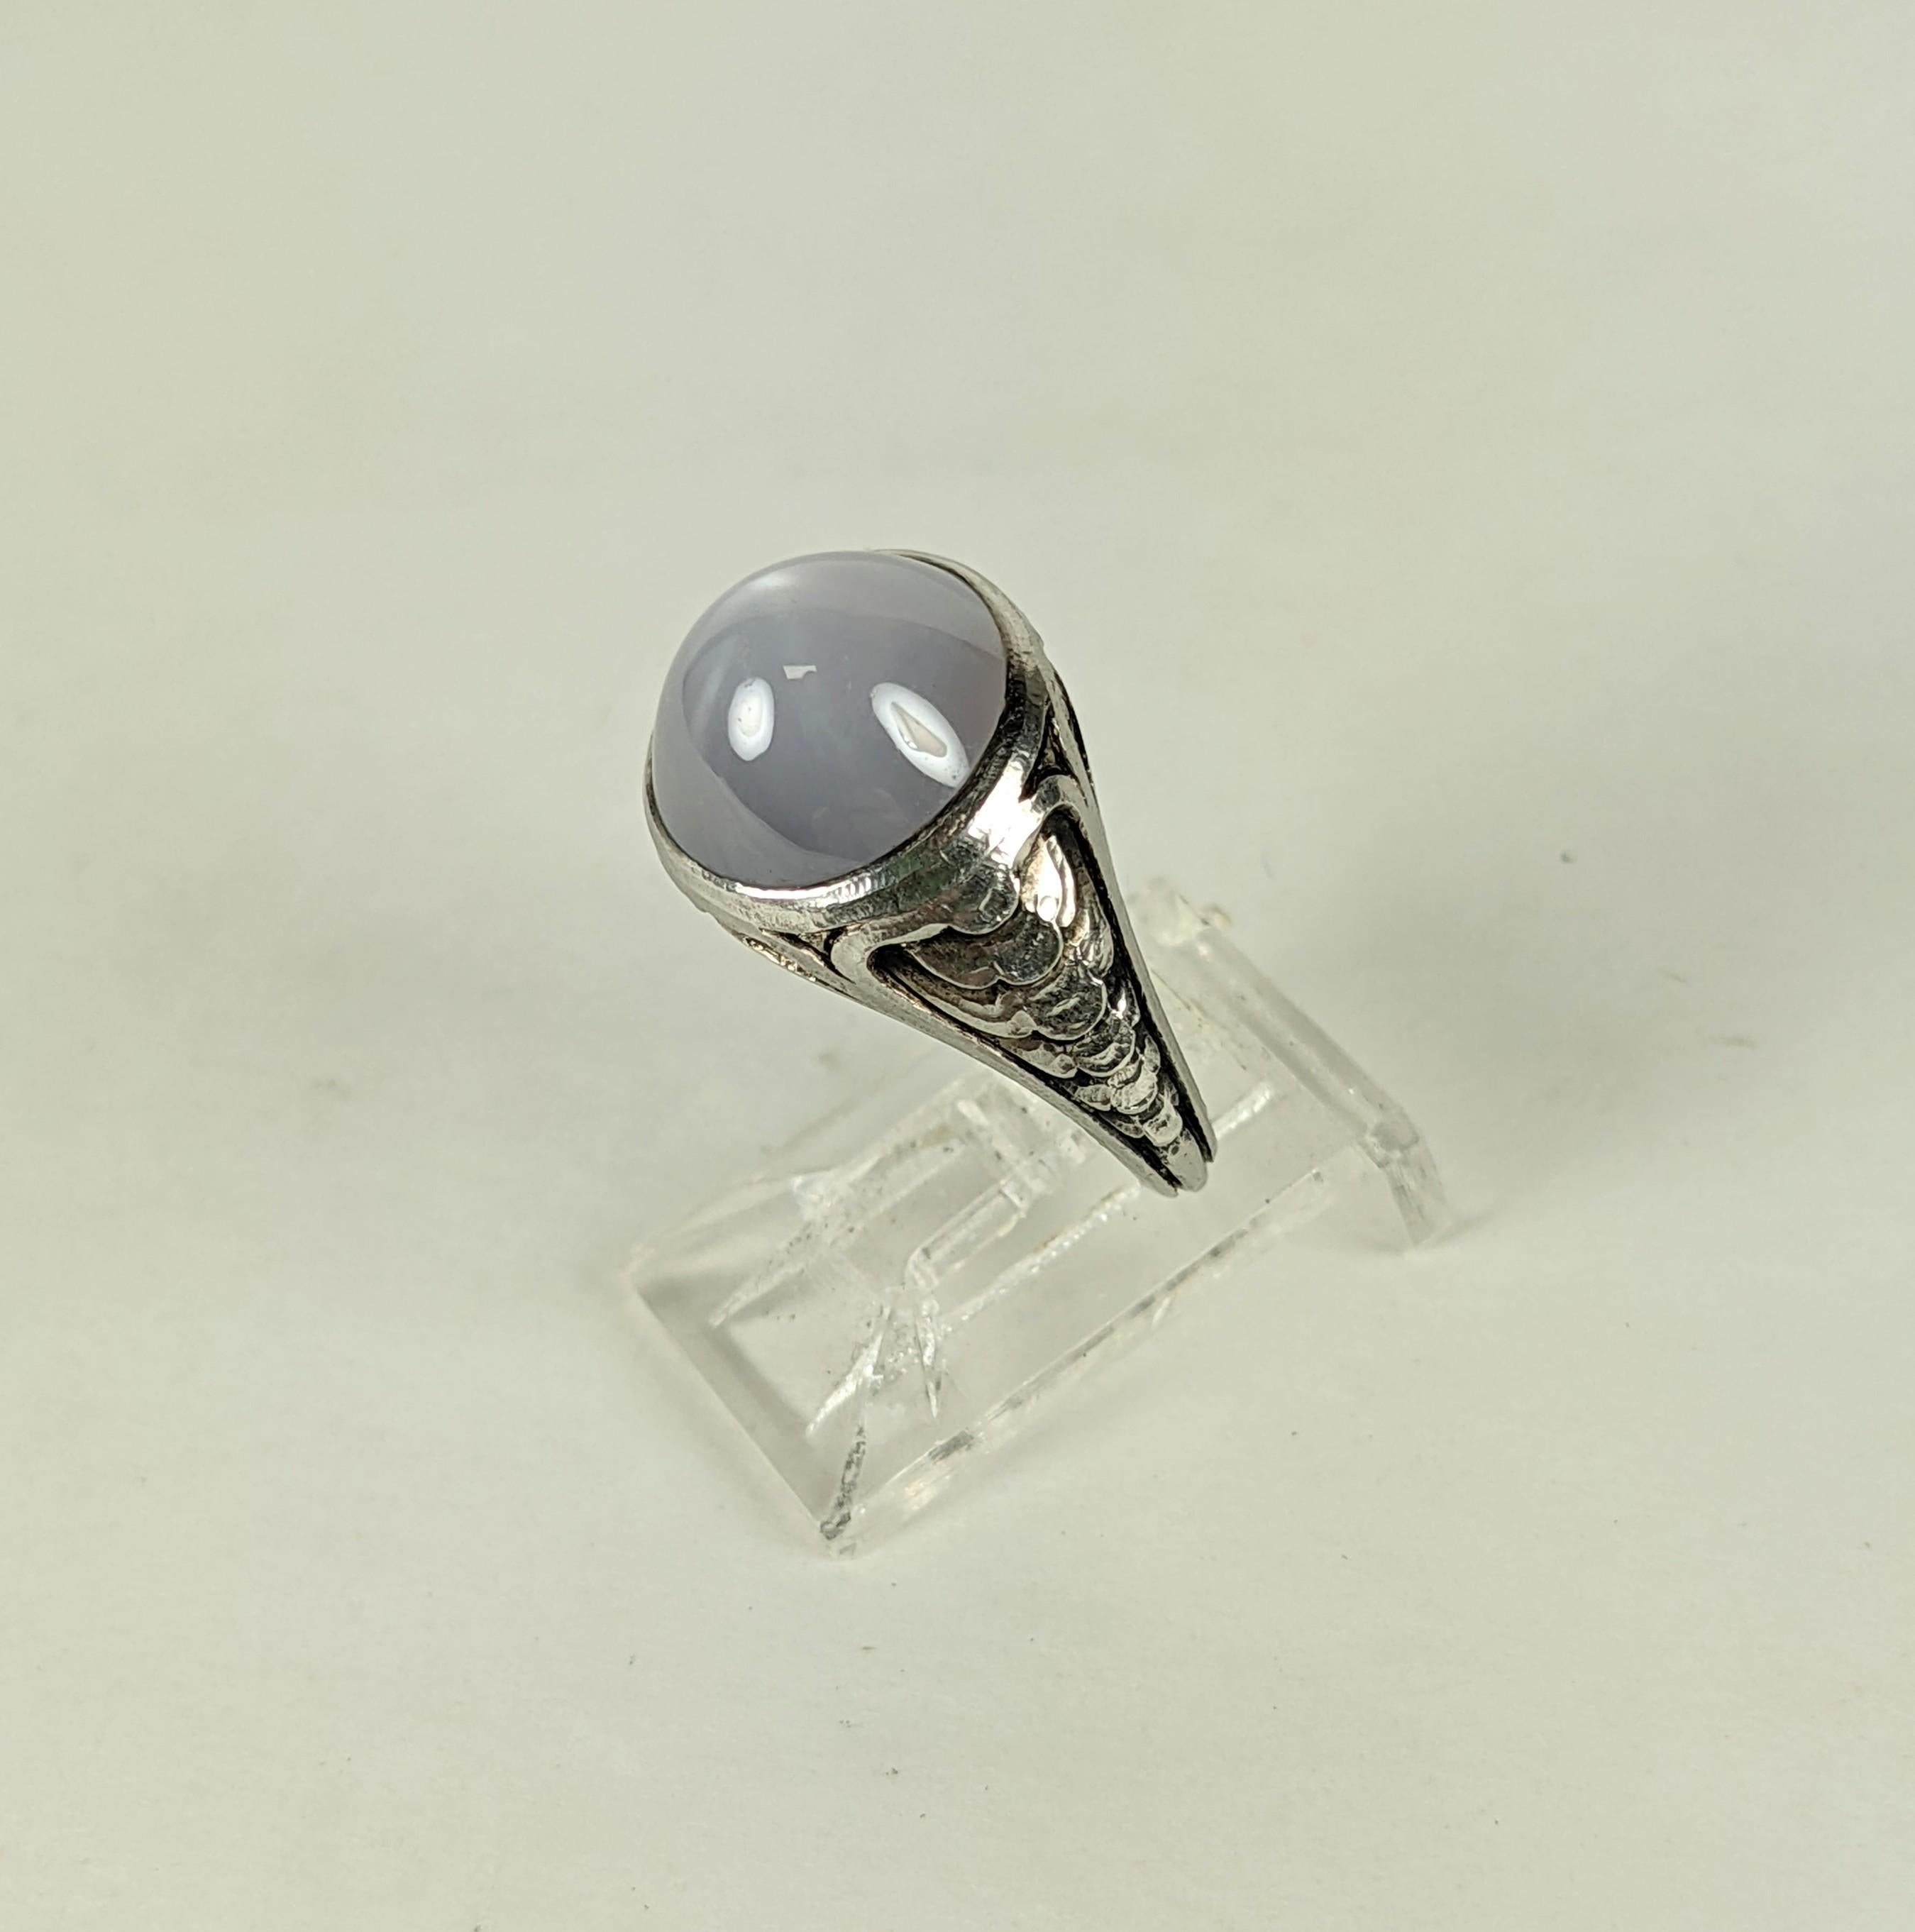 Art Nouveau Bullet Cabochon Star Sapphire pinky ring set in platinum from the early 20th Century.  10mm star sapphire with elegant, scalloped setting circa 1900's USA. 
Smaller Size 4.
